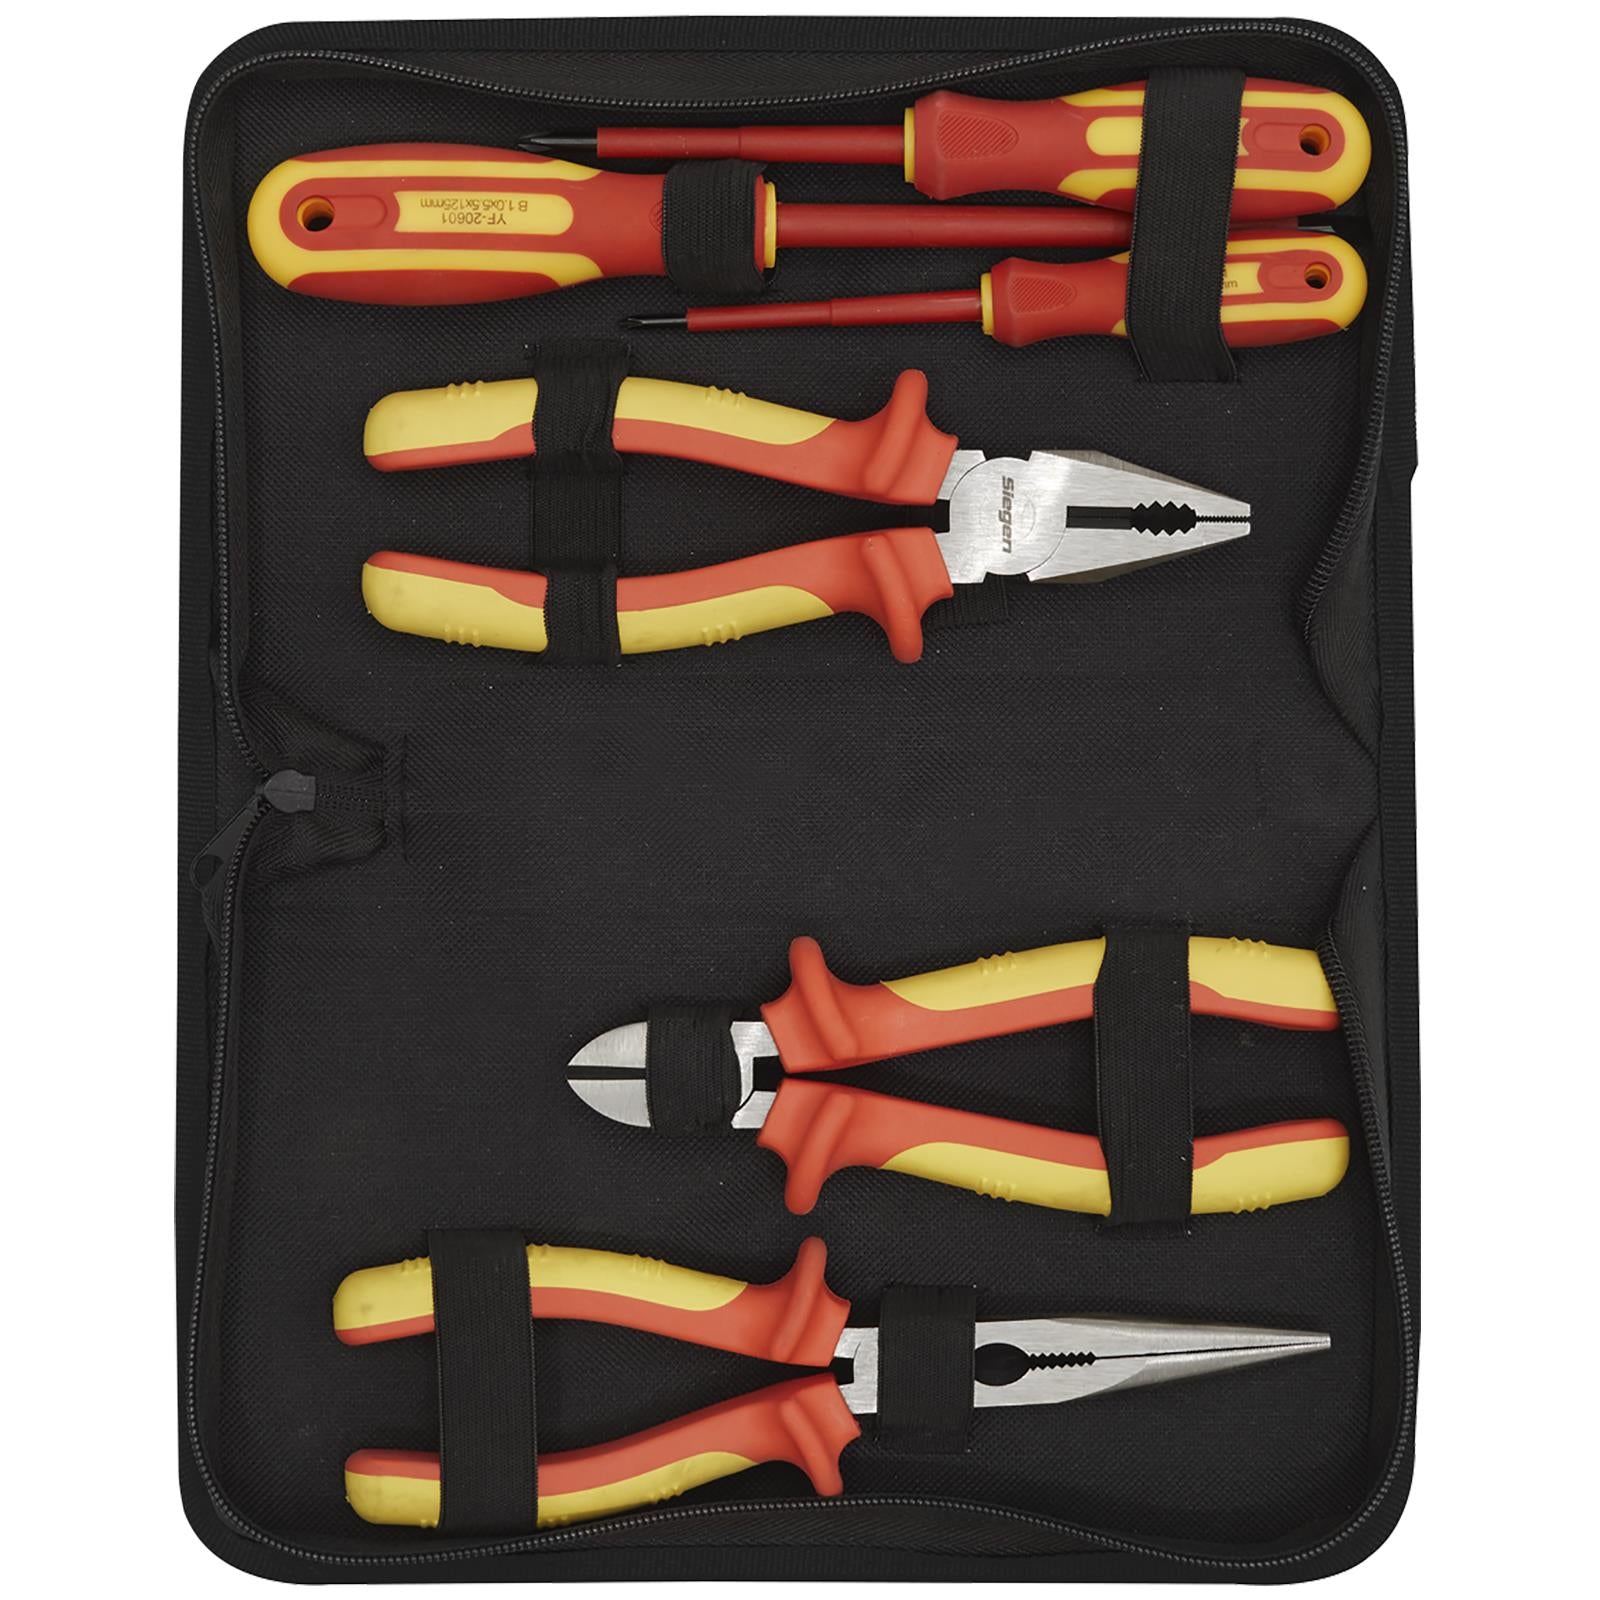 Siegen by Sealey Electrical VDE Tool Set 6 Piece Pliers Screwdrivers